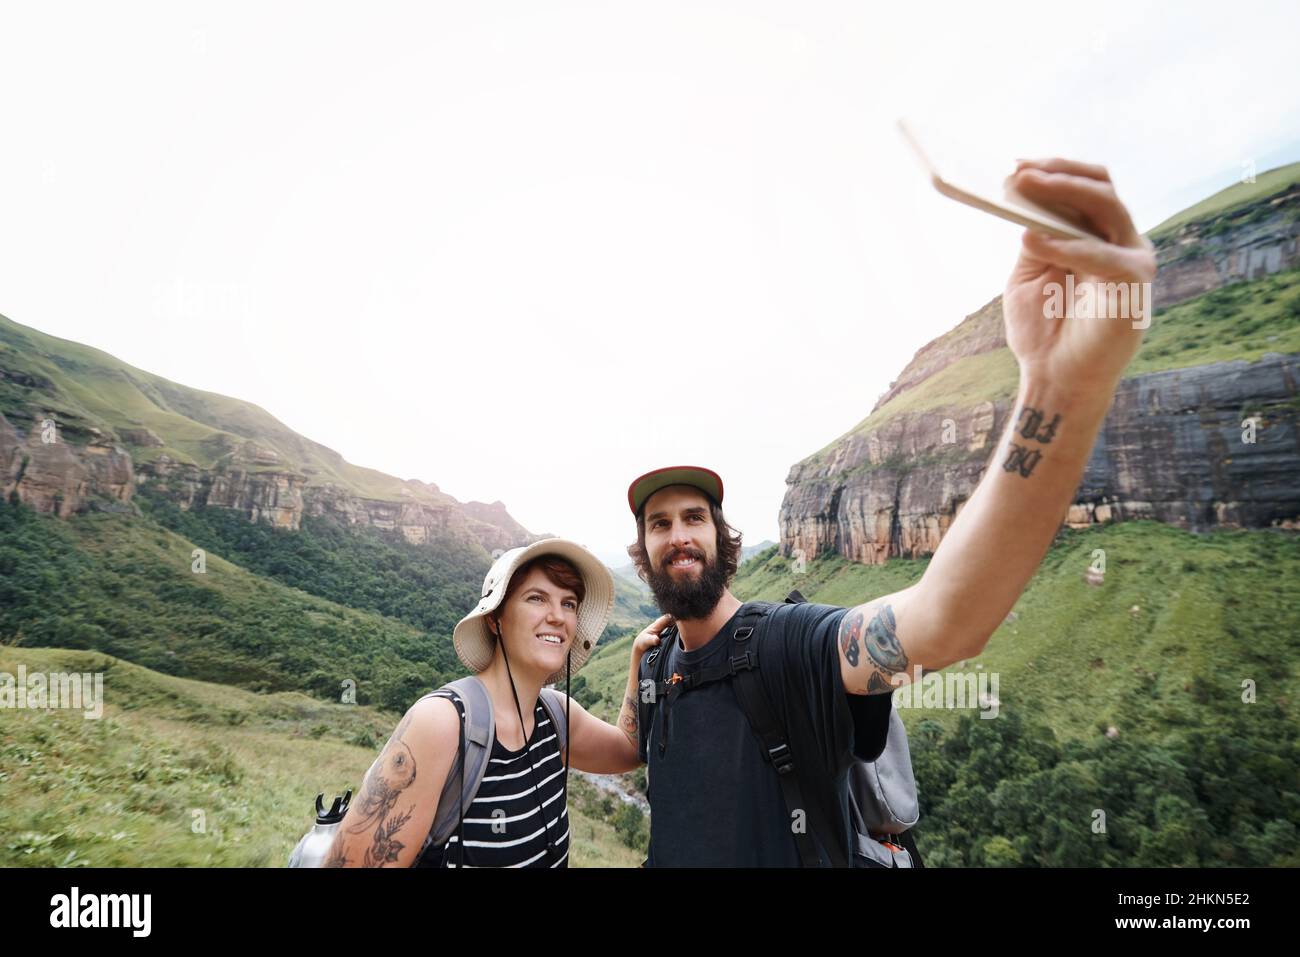 Documenting their adventures together Stock Photo